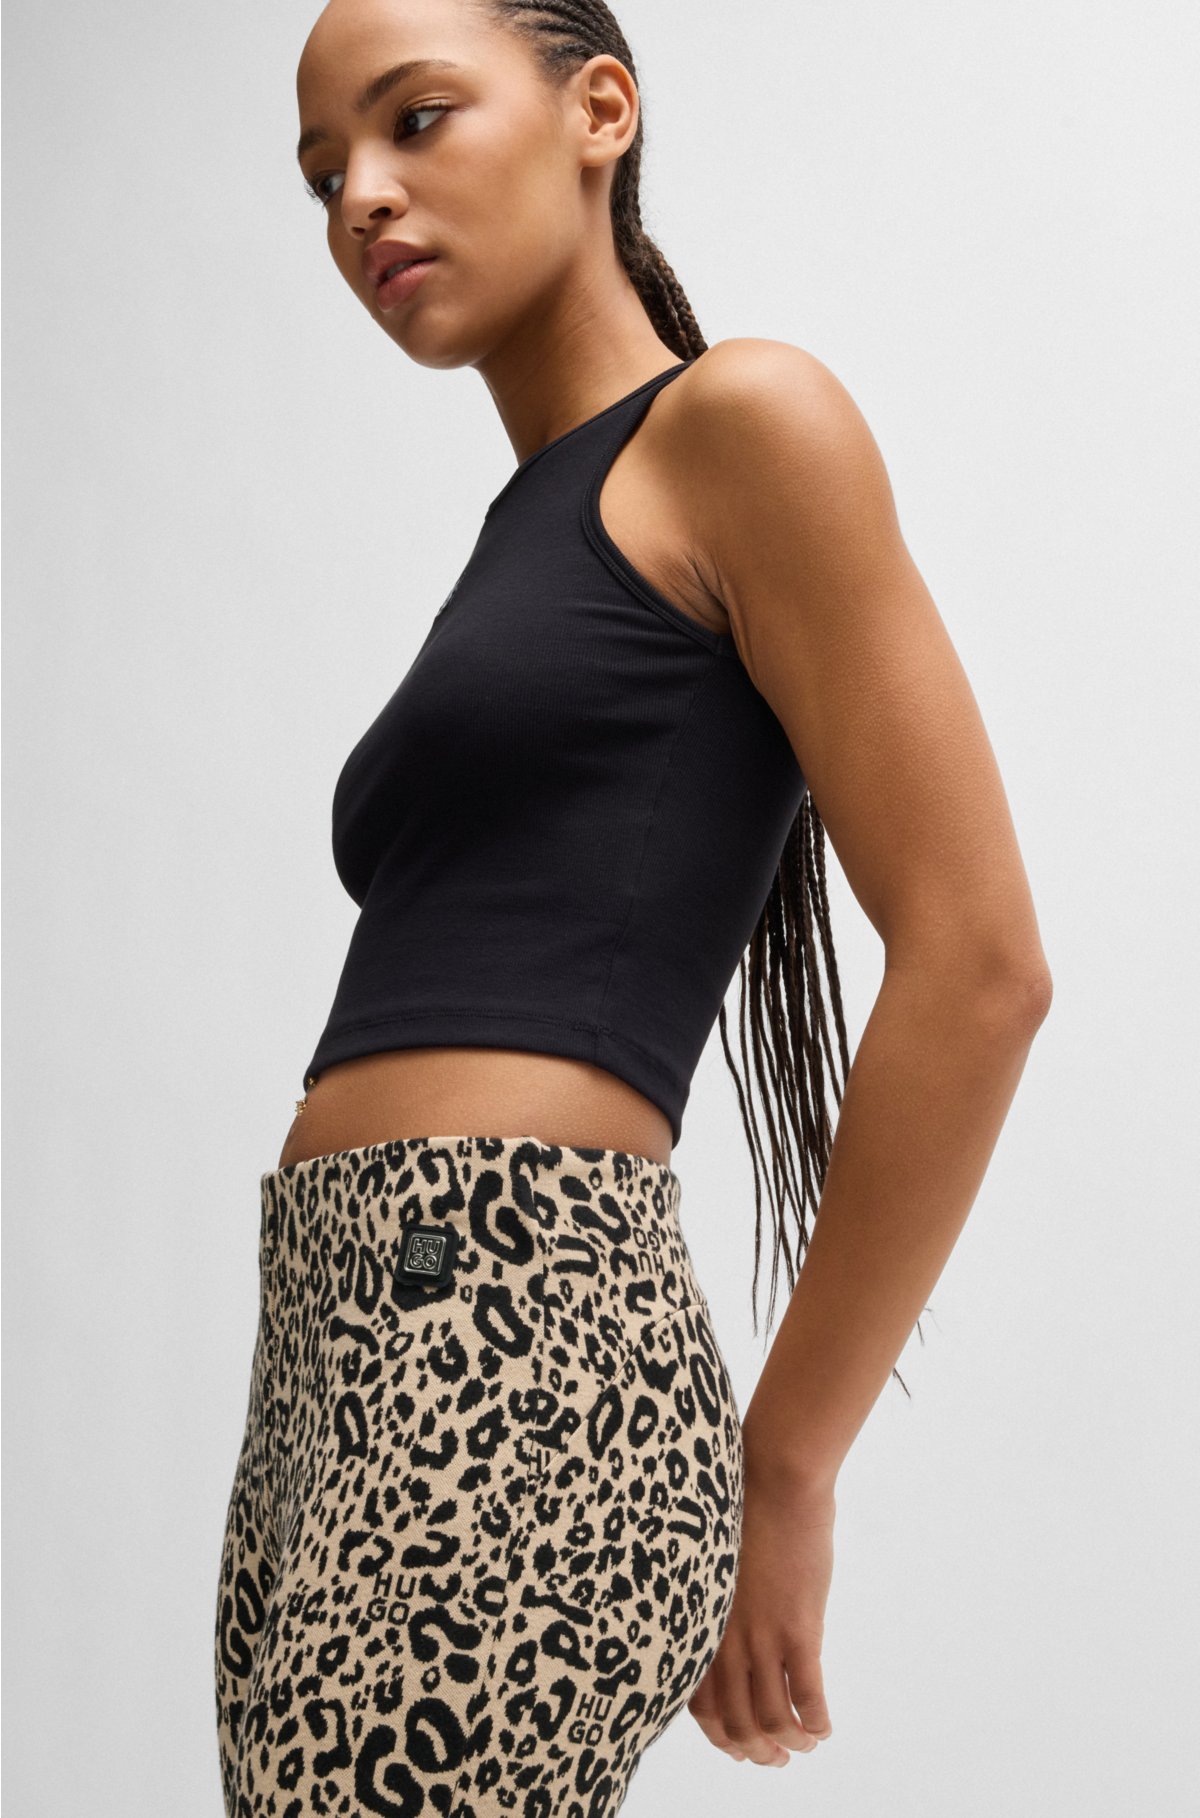 Slim-fit animal-print trousers with flared leg, Patterned